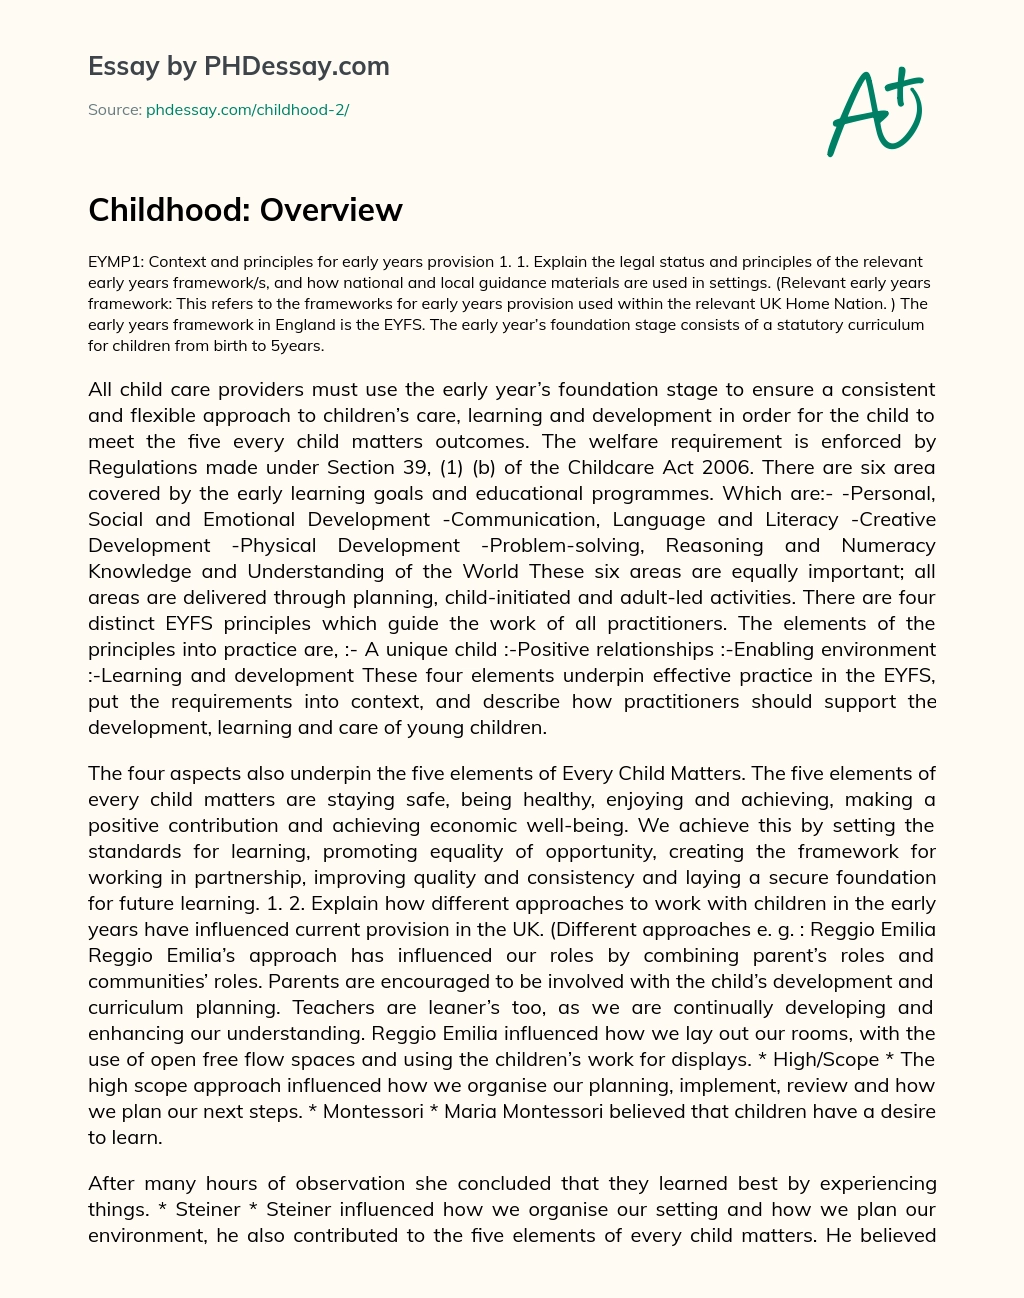 Childhood: Overview essay